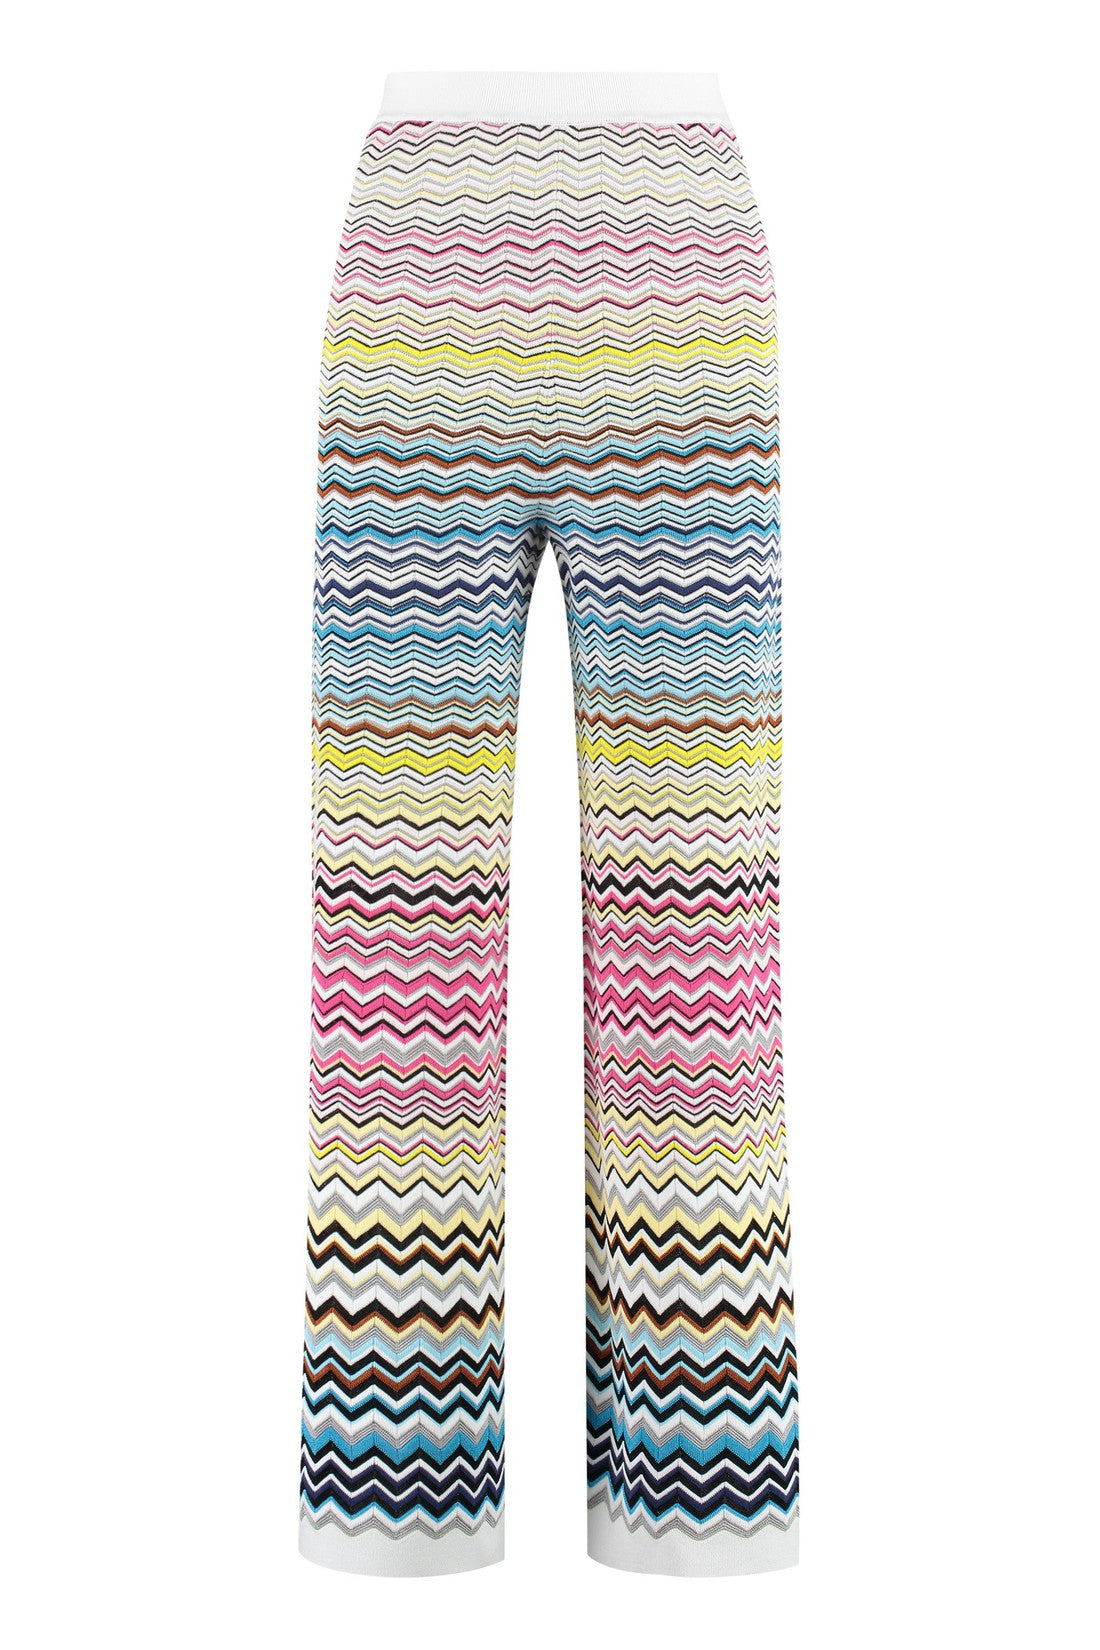 Missoni-OUTLET-SALE-Chevron knitted palazzo trousers-ARCHIVIST